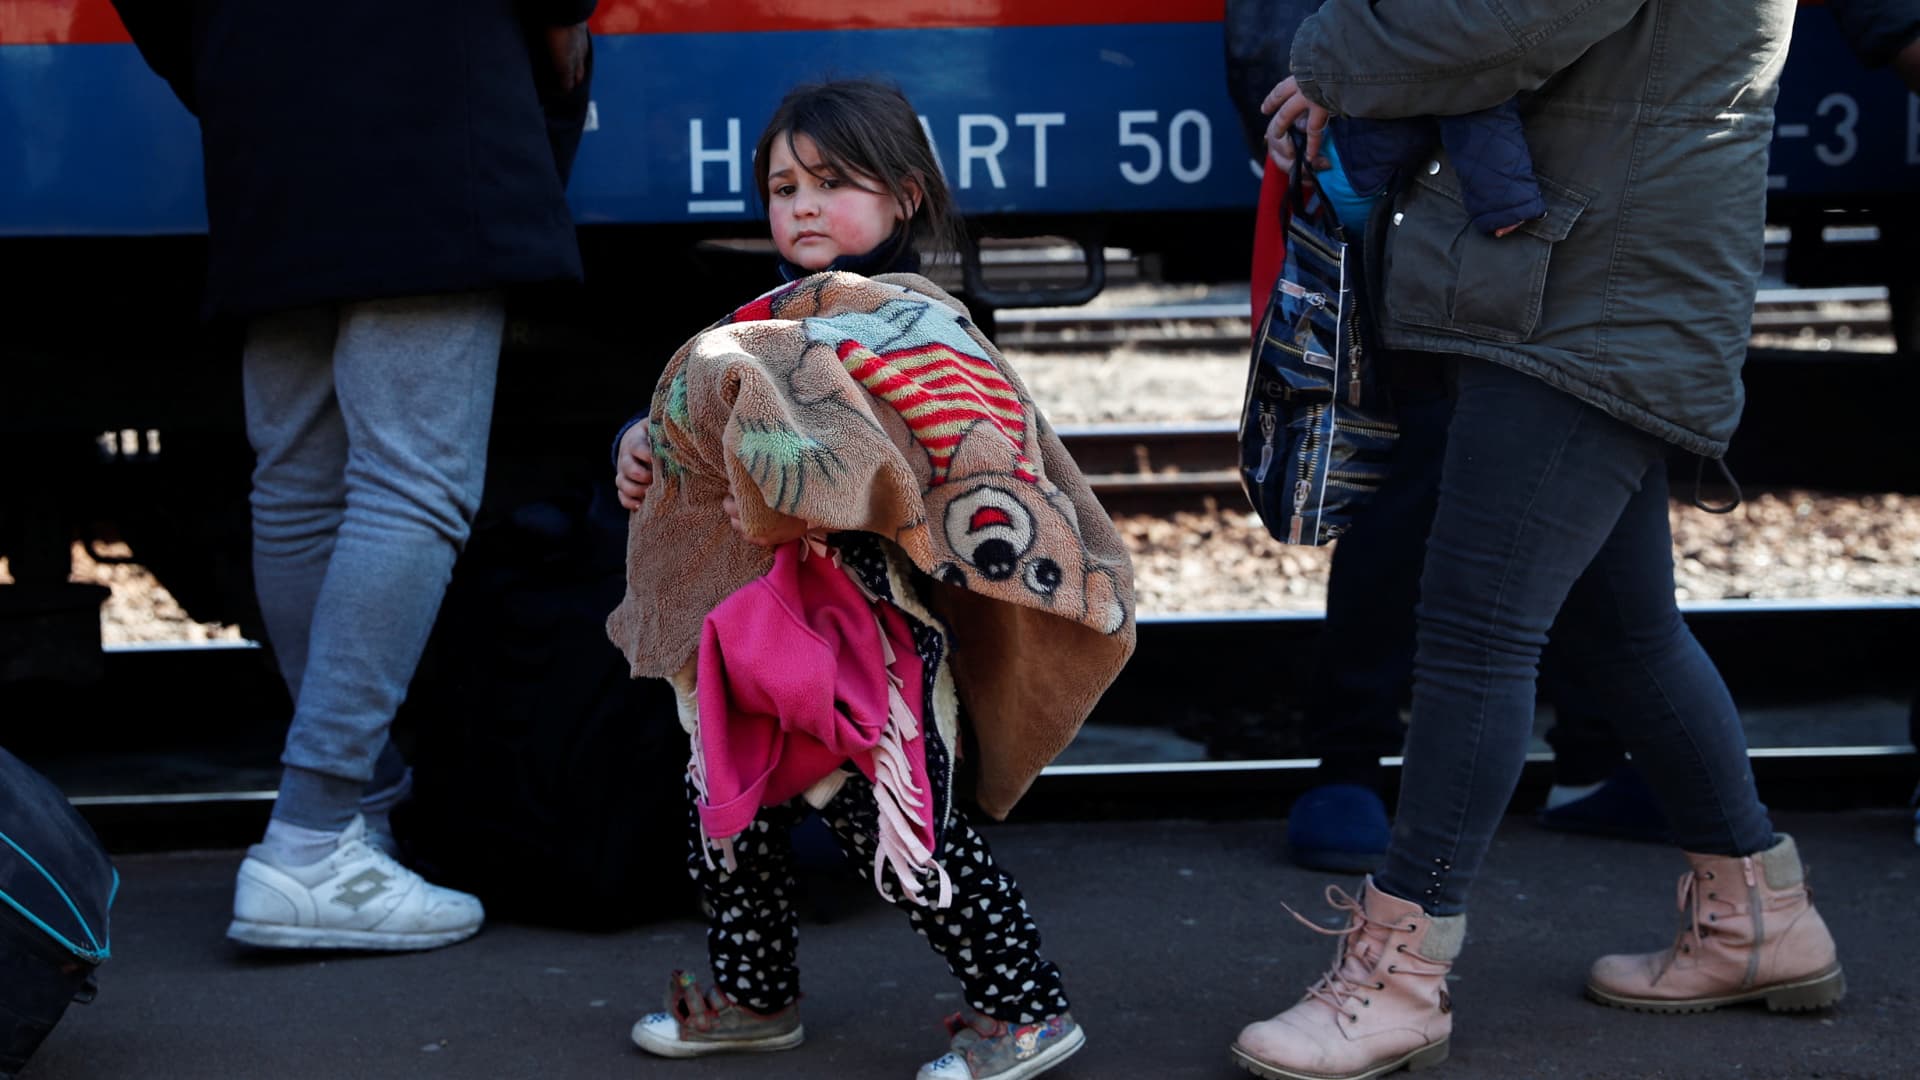 People fleeing from Ukraine to Hungary arrive at the train station, after Russia launched a massive military operation against Ukraine, in Zahony, Hungary, February 27, 2022.